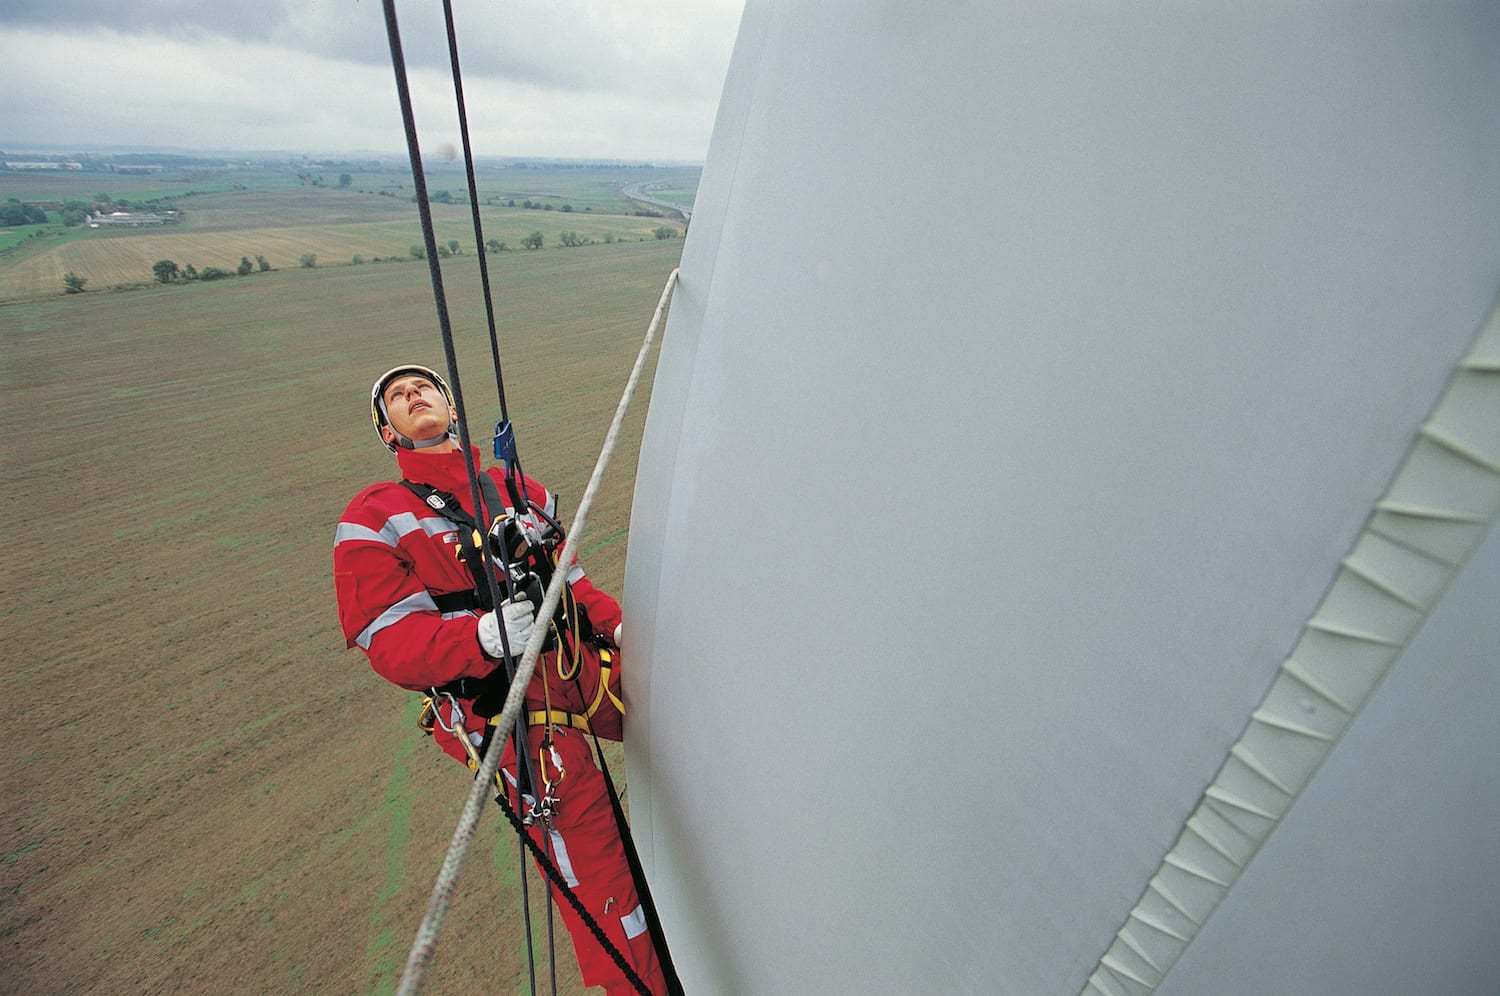 Don’t Look Down: These Wind Power Techs Dangle from Massive Turbine Blades